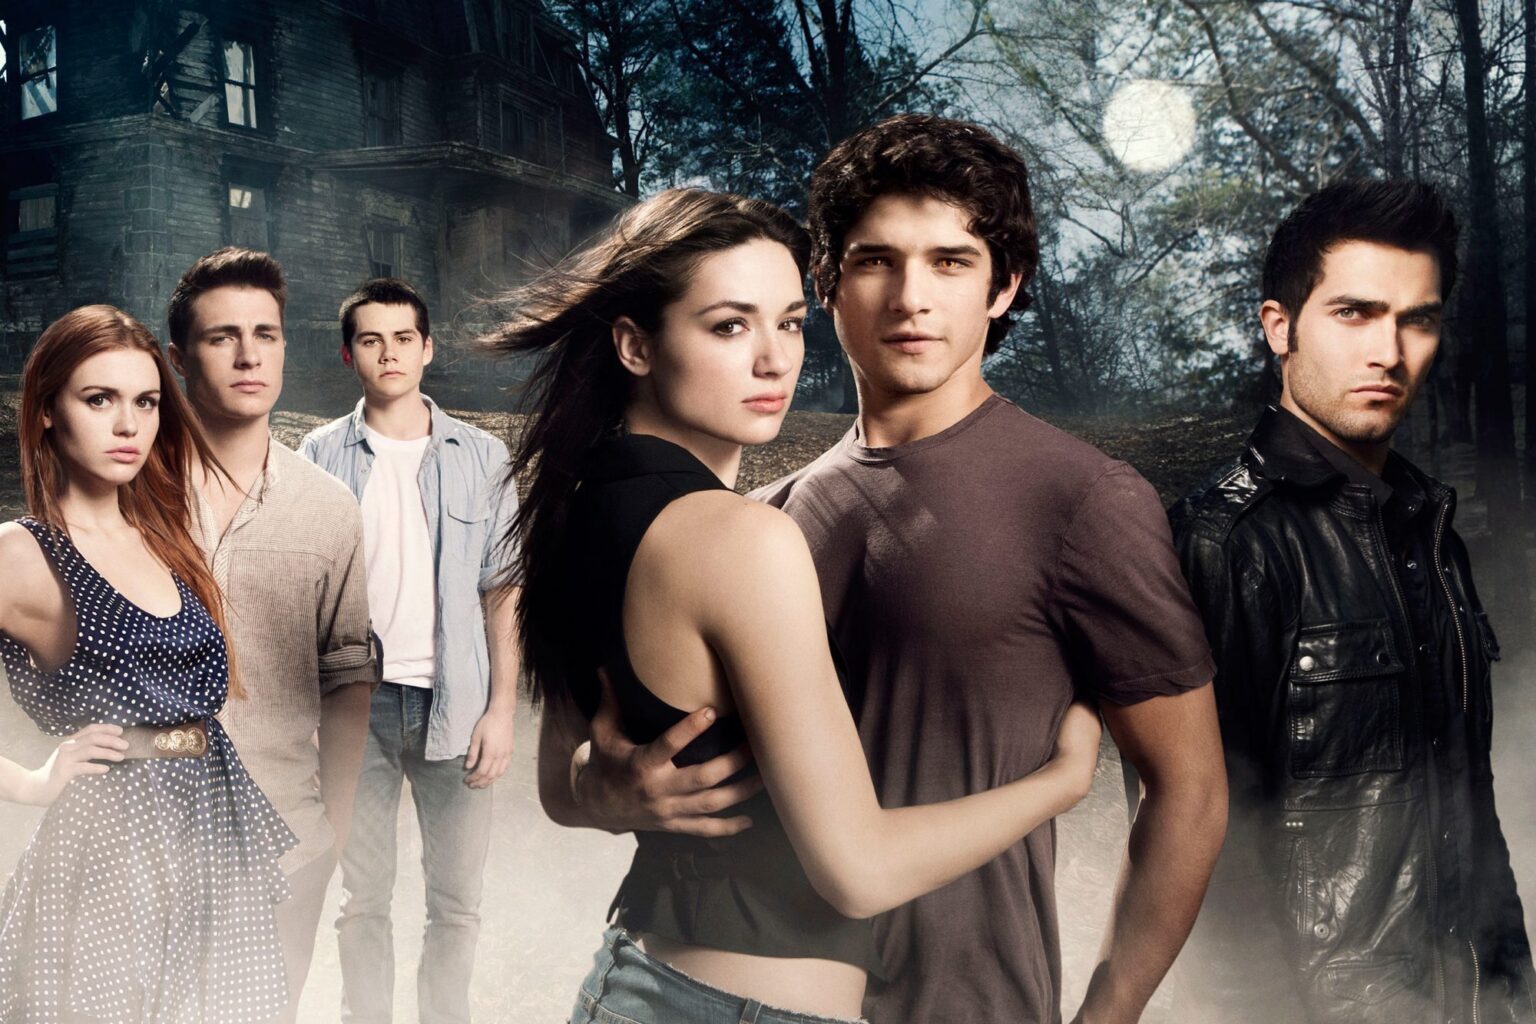 The 'Teen Wolf' ensemble then spent six years telling the story of Scott McCall. What is the cast up to now? Catch the cast in their latest projects.